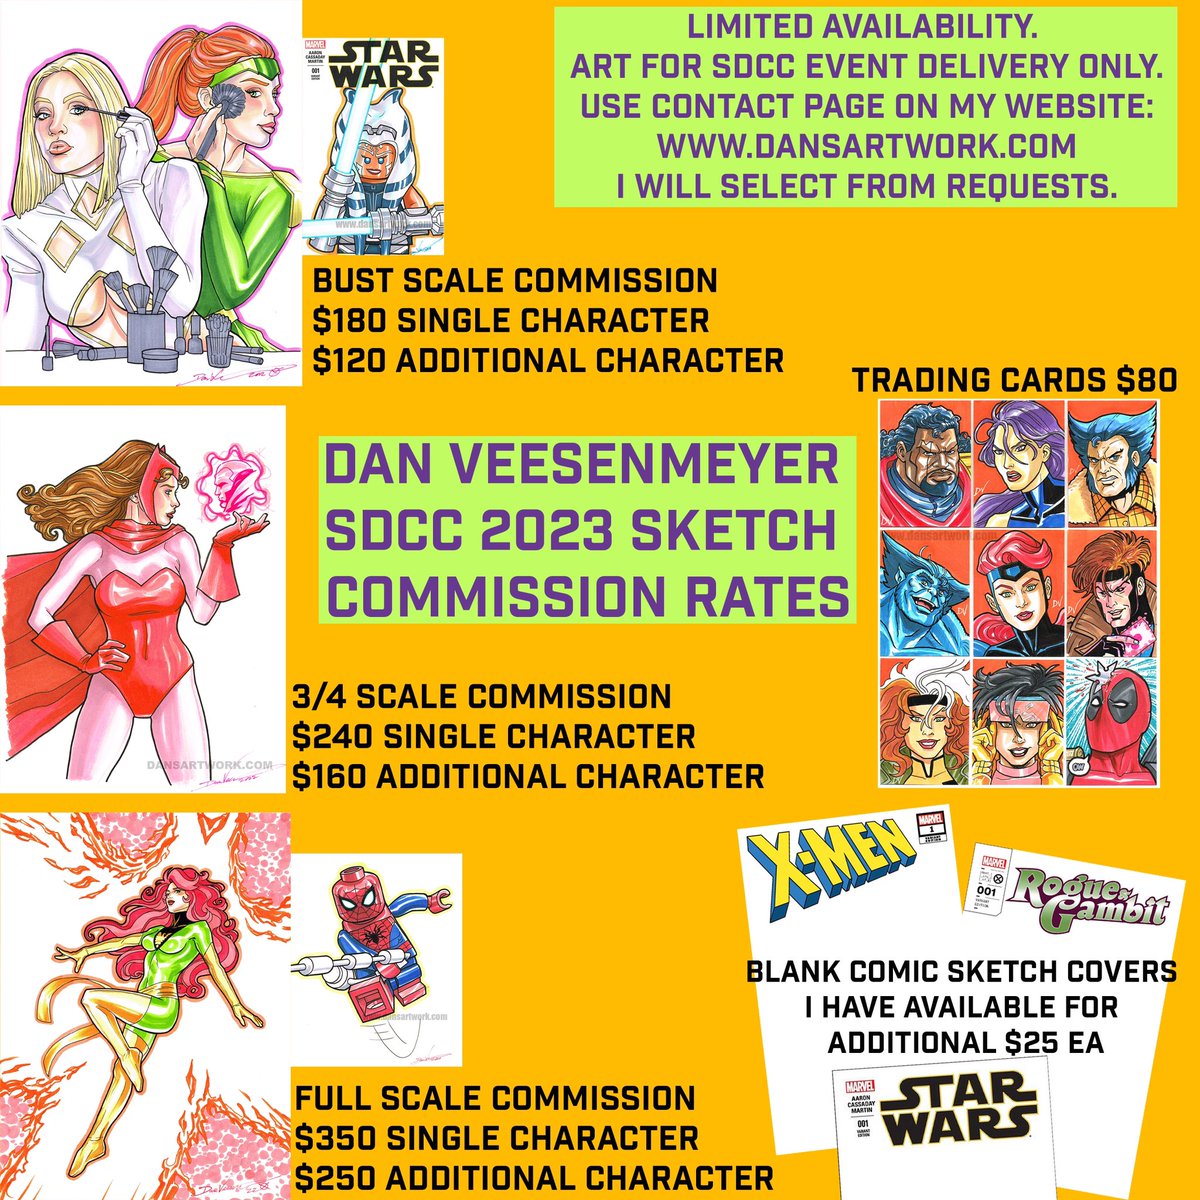 The talented Hasbro, Lego, and #XMenTAS artist @dveese has opened his #SDCC commission list — be sure you read all rules carefully: sdccblog.com/2023/05/dan-ve…